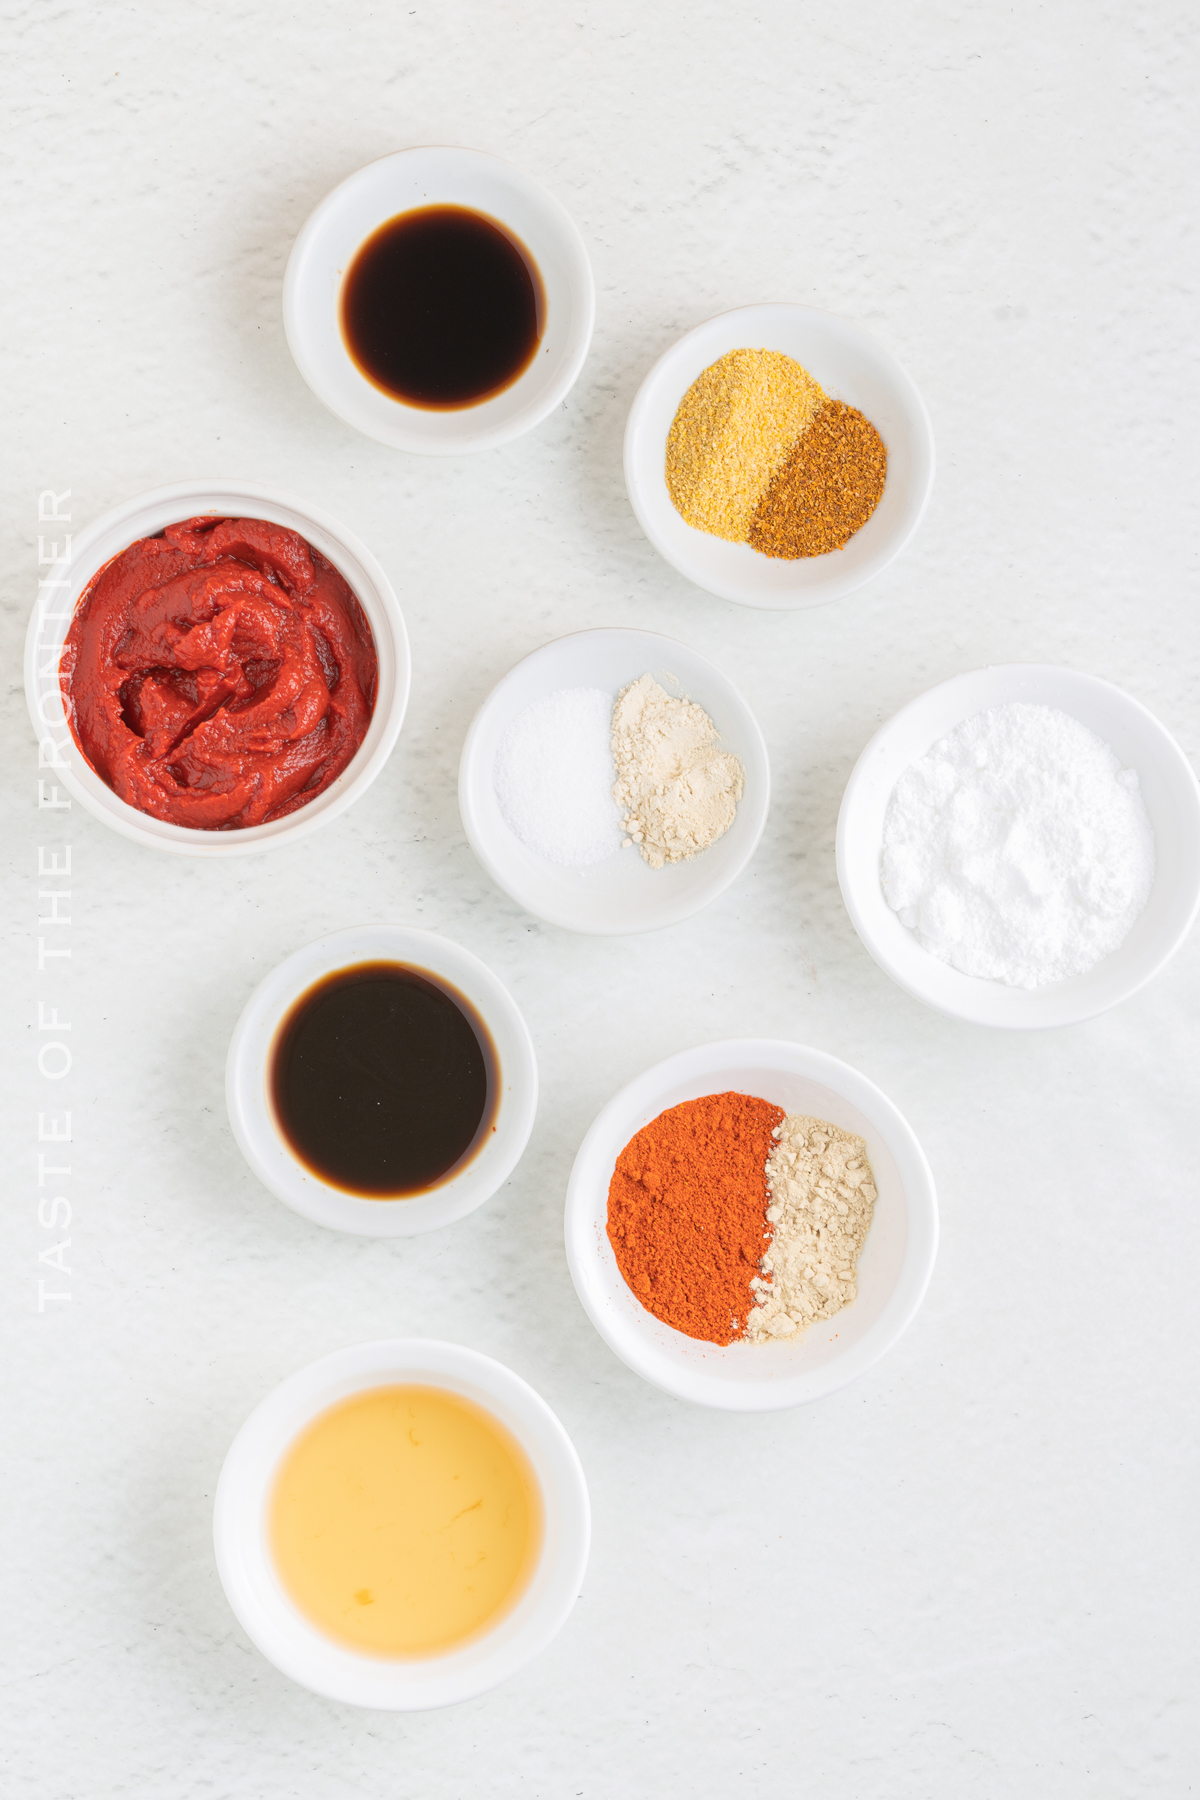 Ingredients for Keto BBQ Sauce